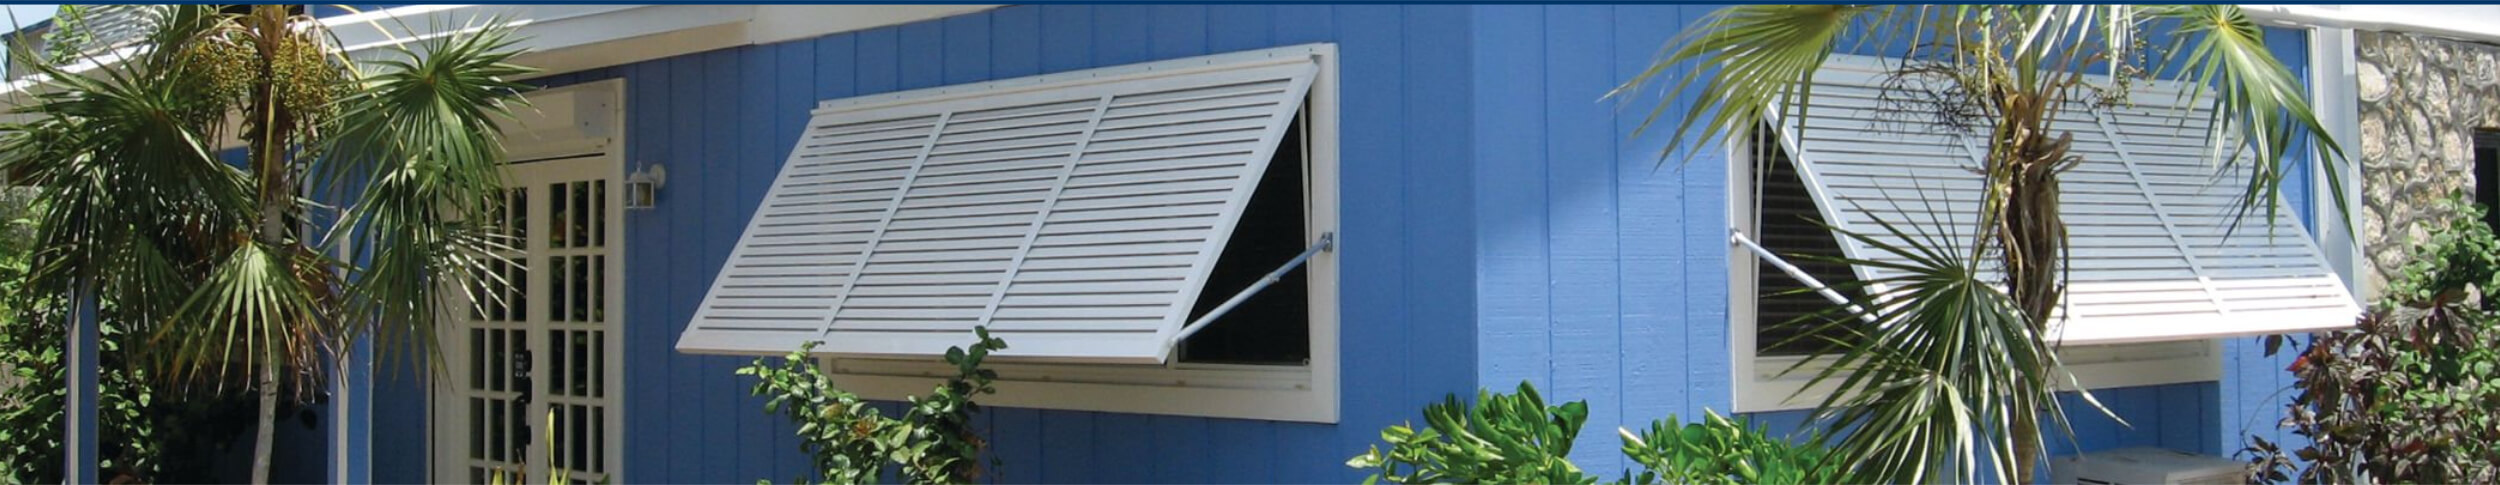 Bahama & Colonial Systems - Hurricane Products - American Shutter Systems Association (Assa)